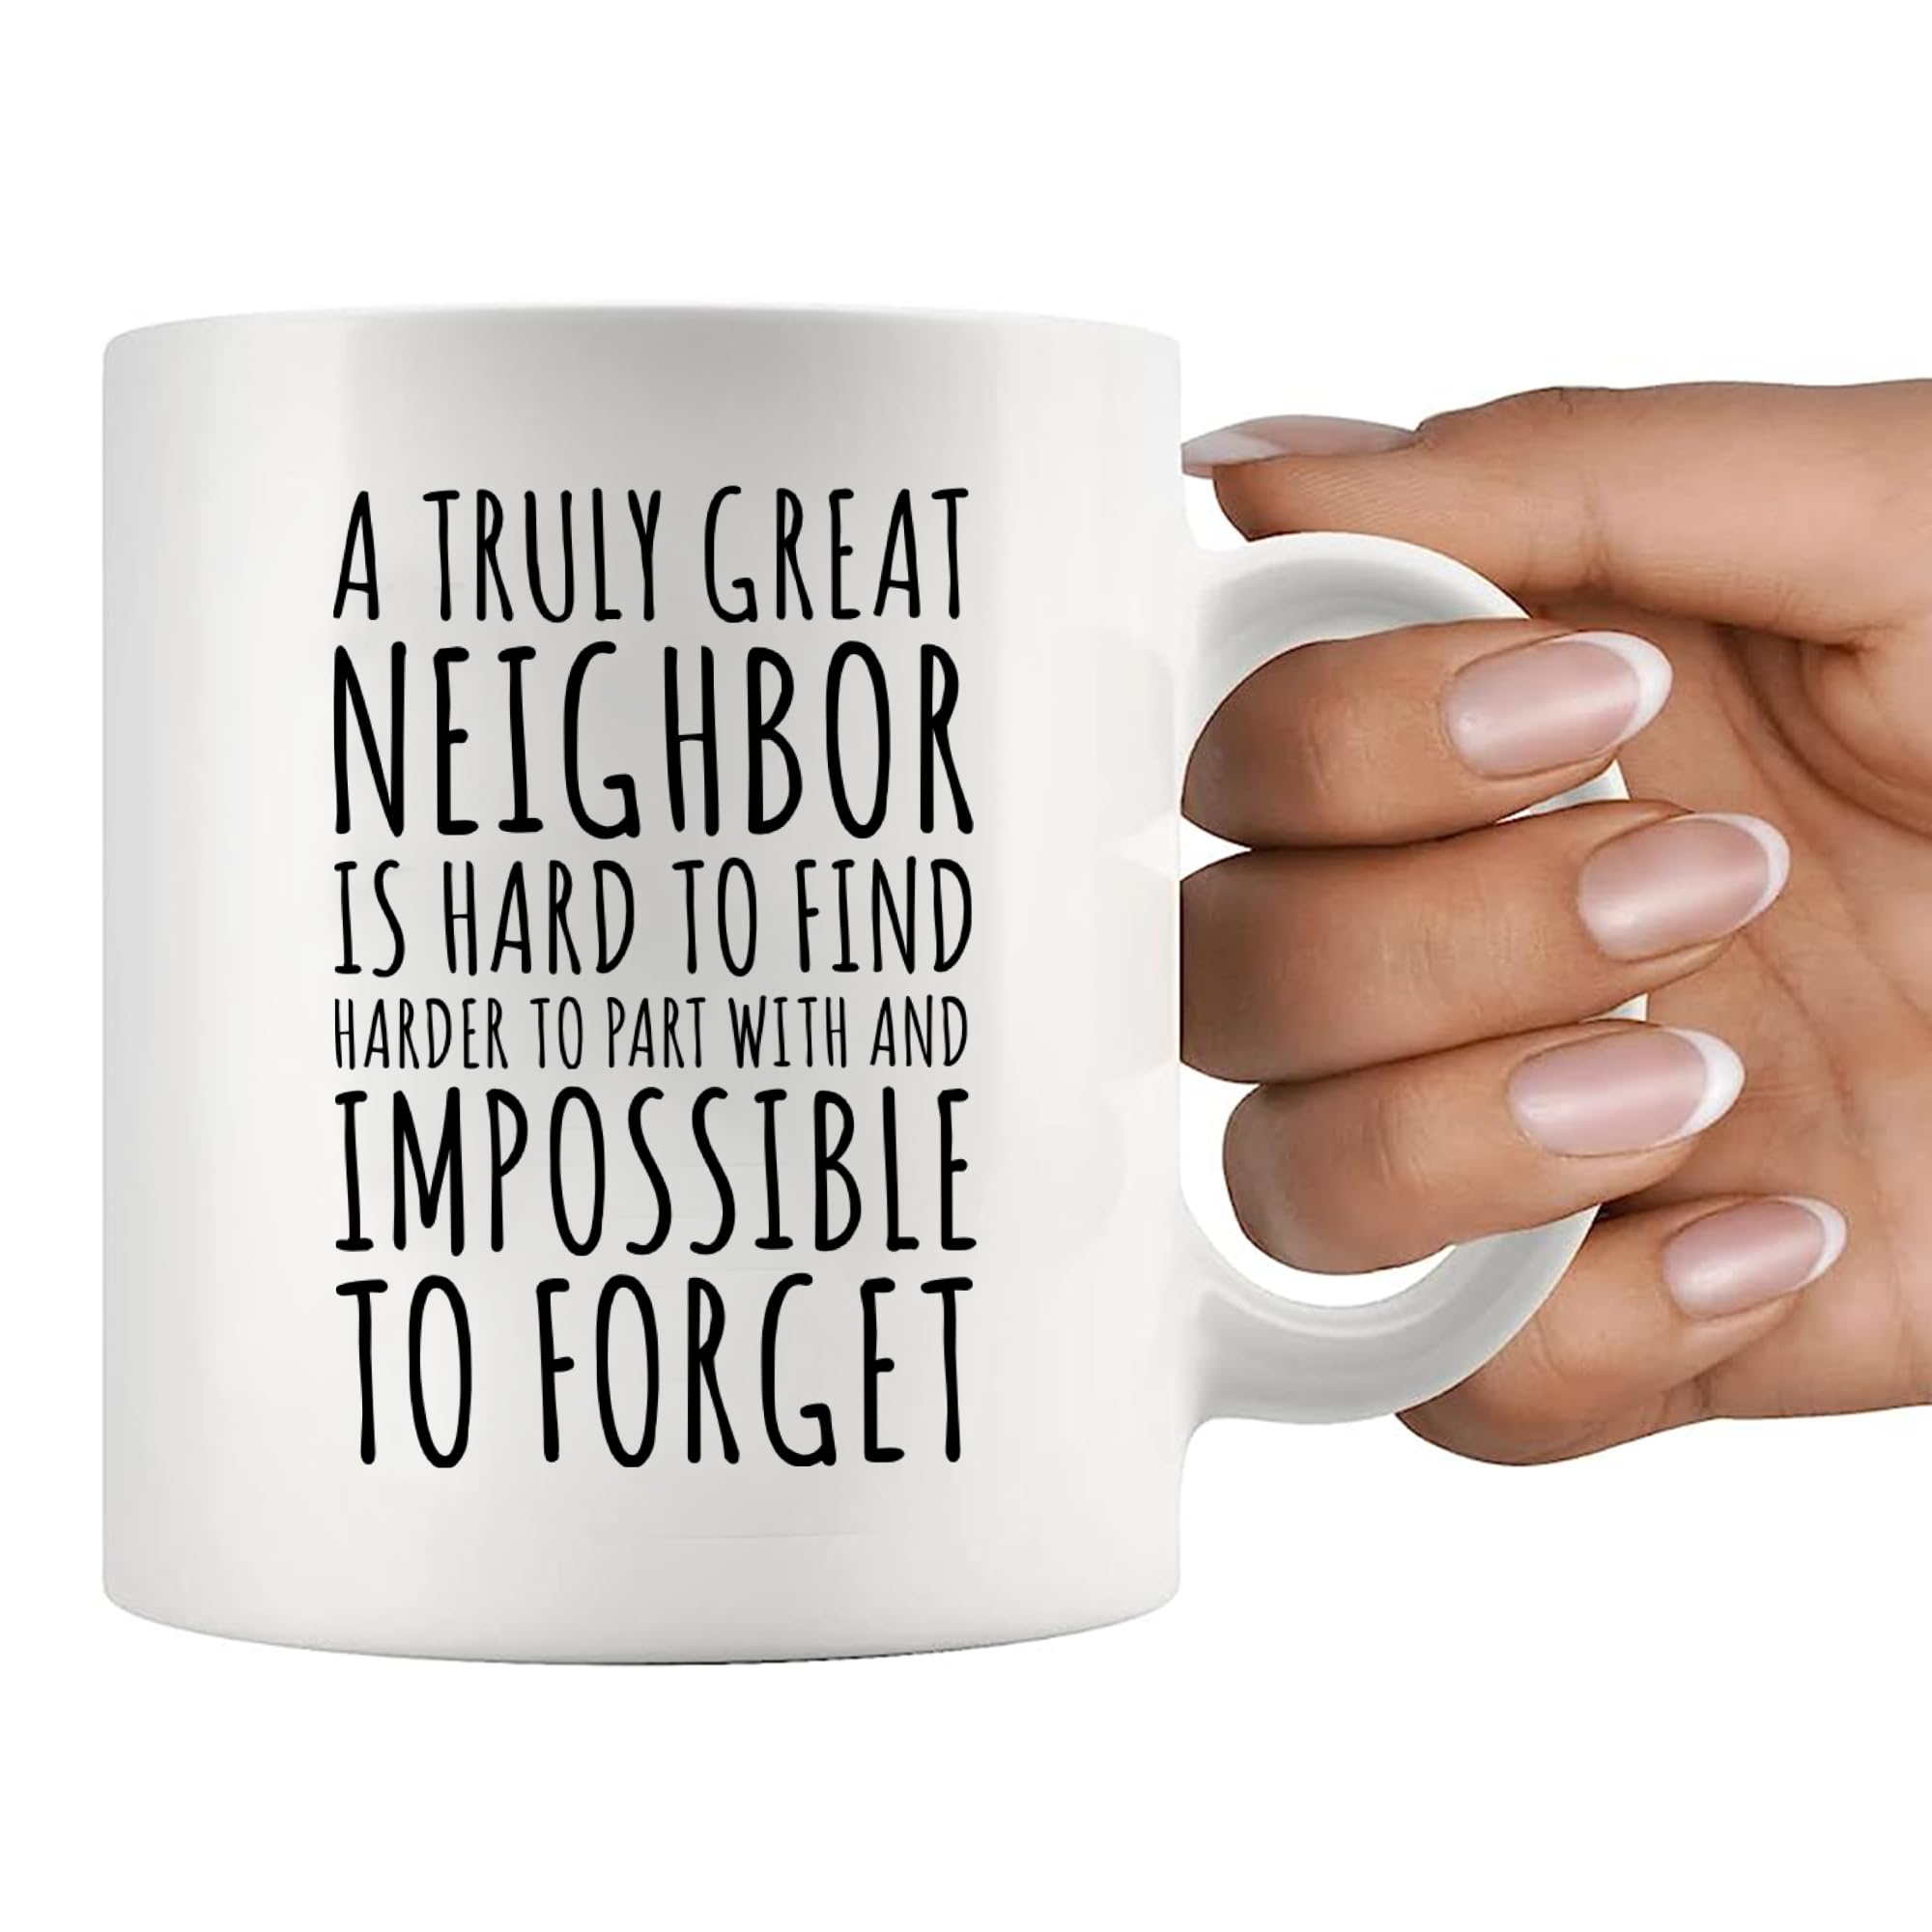 A Truly Great Neighbor Is Hard To Find Difficult To Part With Impossible To Forget Farewell Moving Away Goodbye Housewarming Welcome From Neighborhood Friends Ceramic Coffee Mug Gift 11oz White